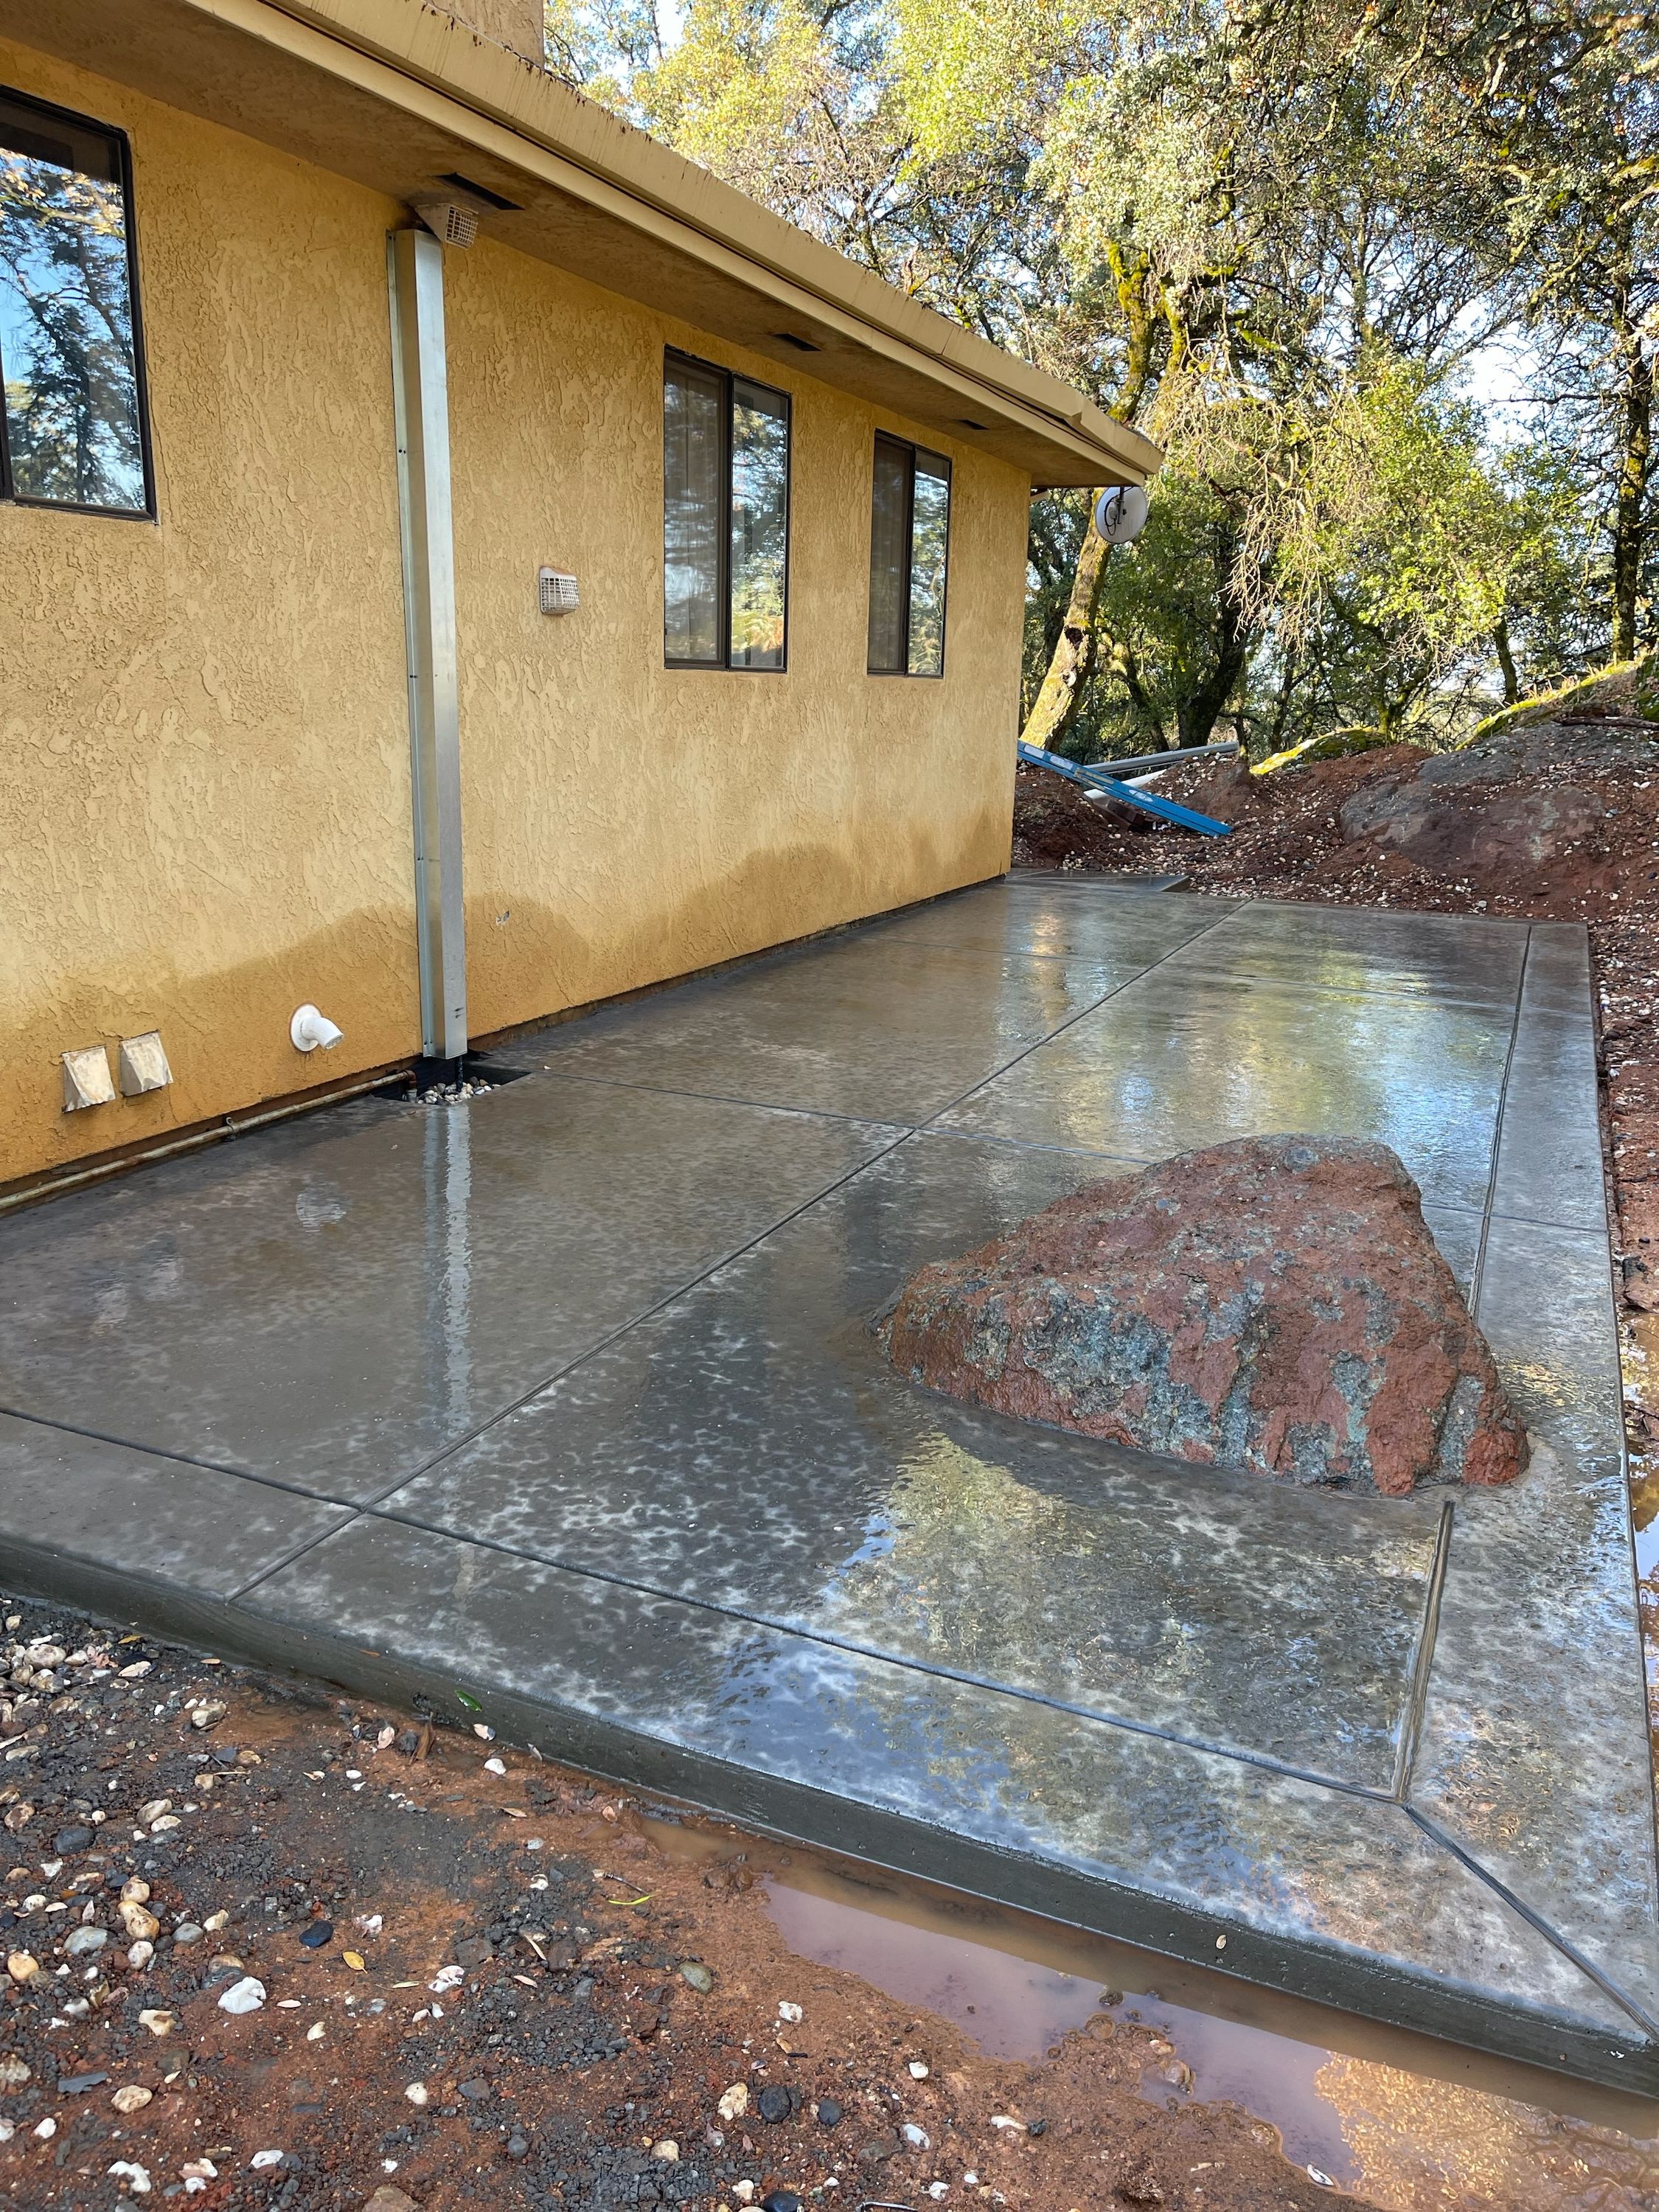 All Photos for Home Hardening Solutions Inc. in Grass Valley, CA